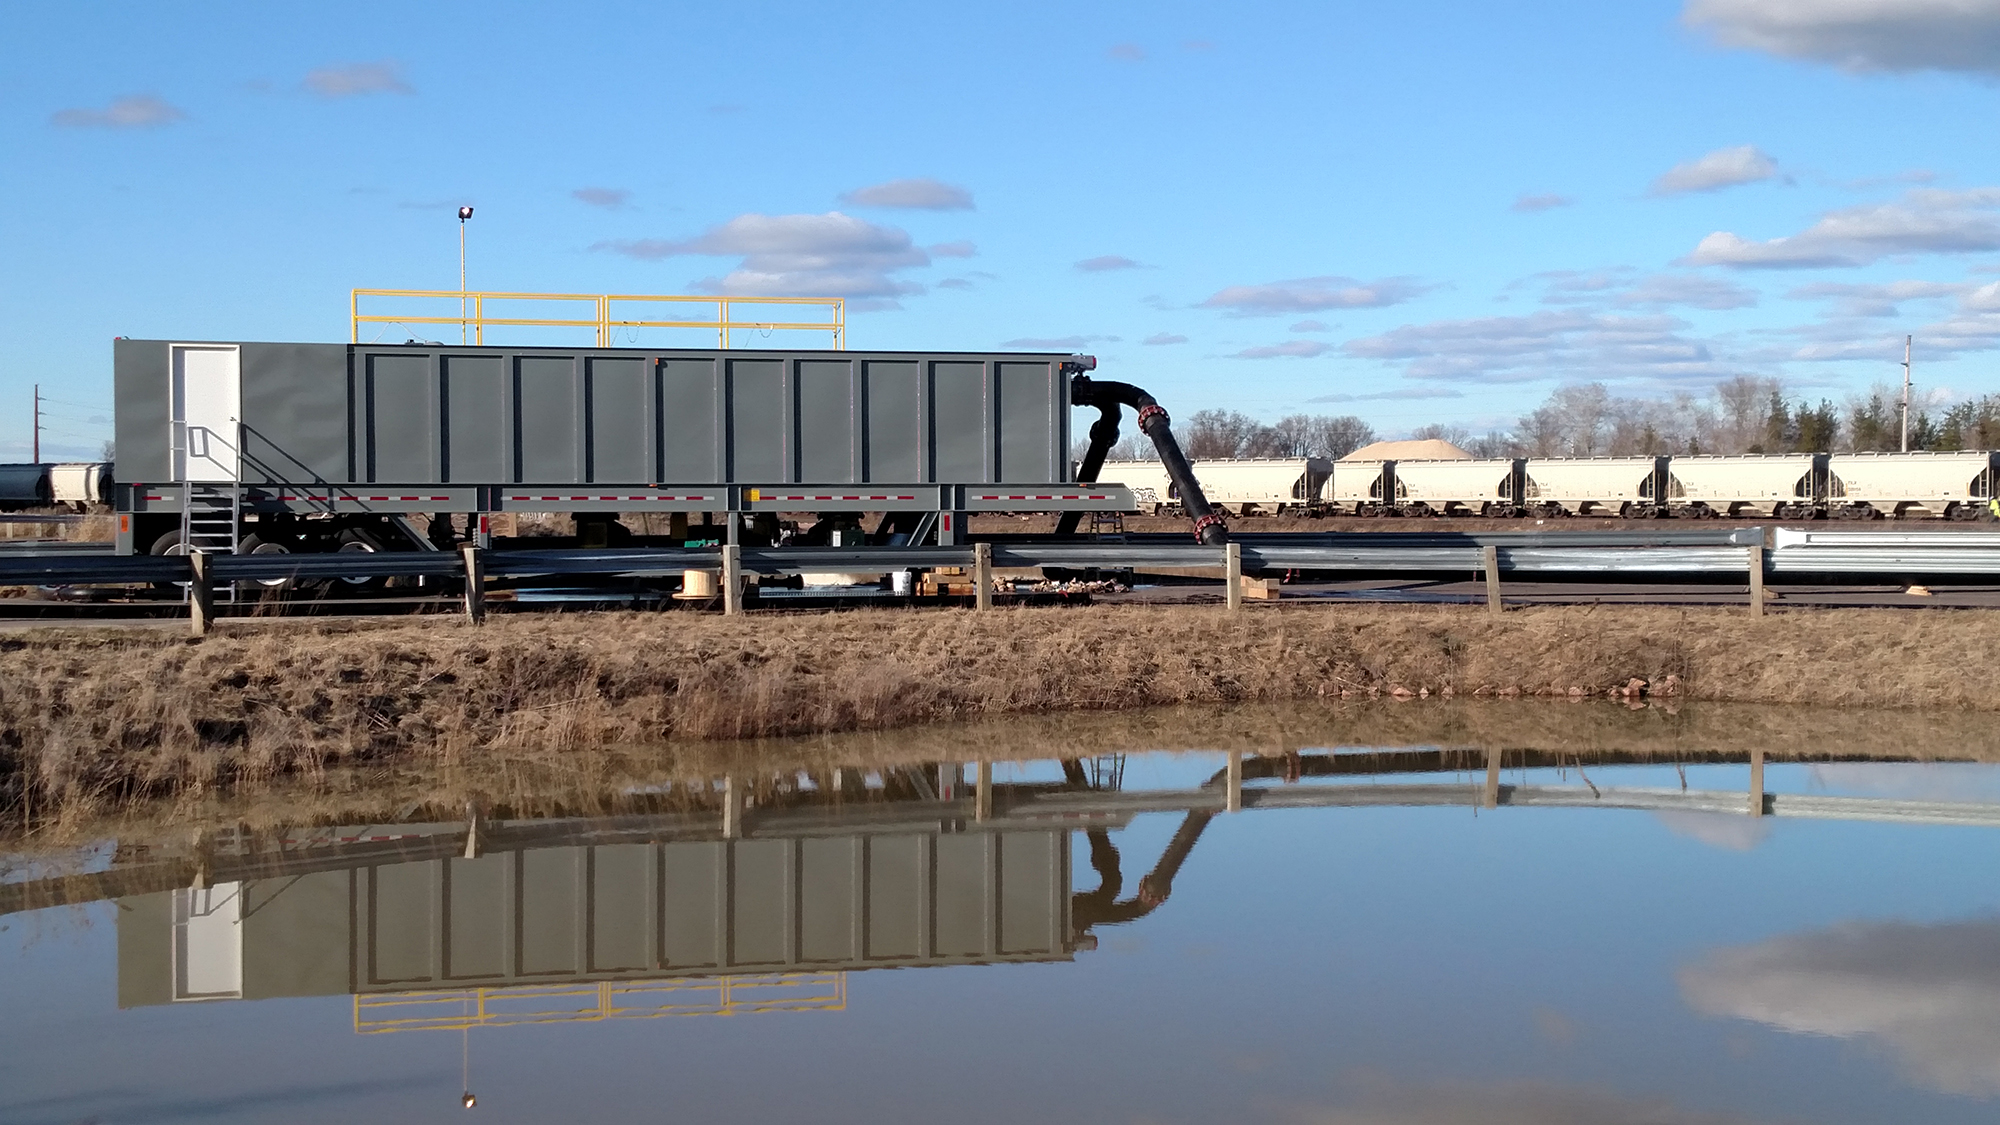 A grey rectangular portable water clarifier cribbed up next to a stormwater holding pond with a train in the background.